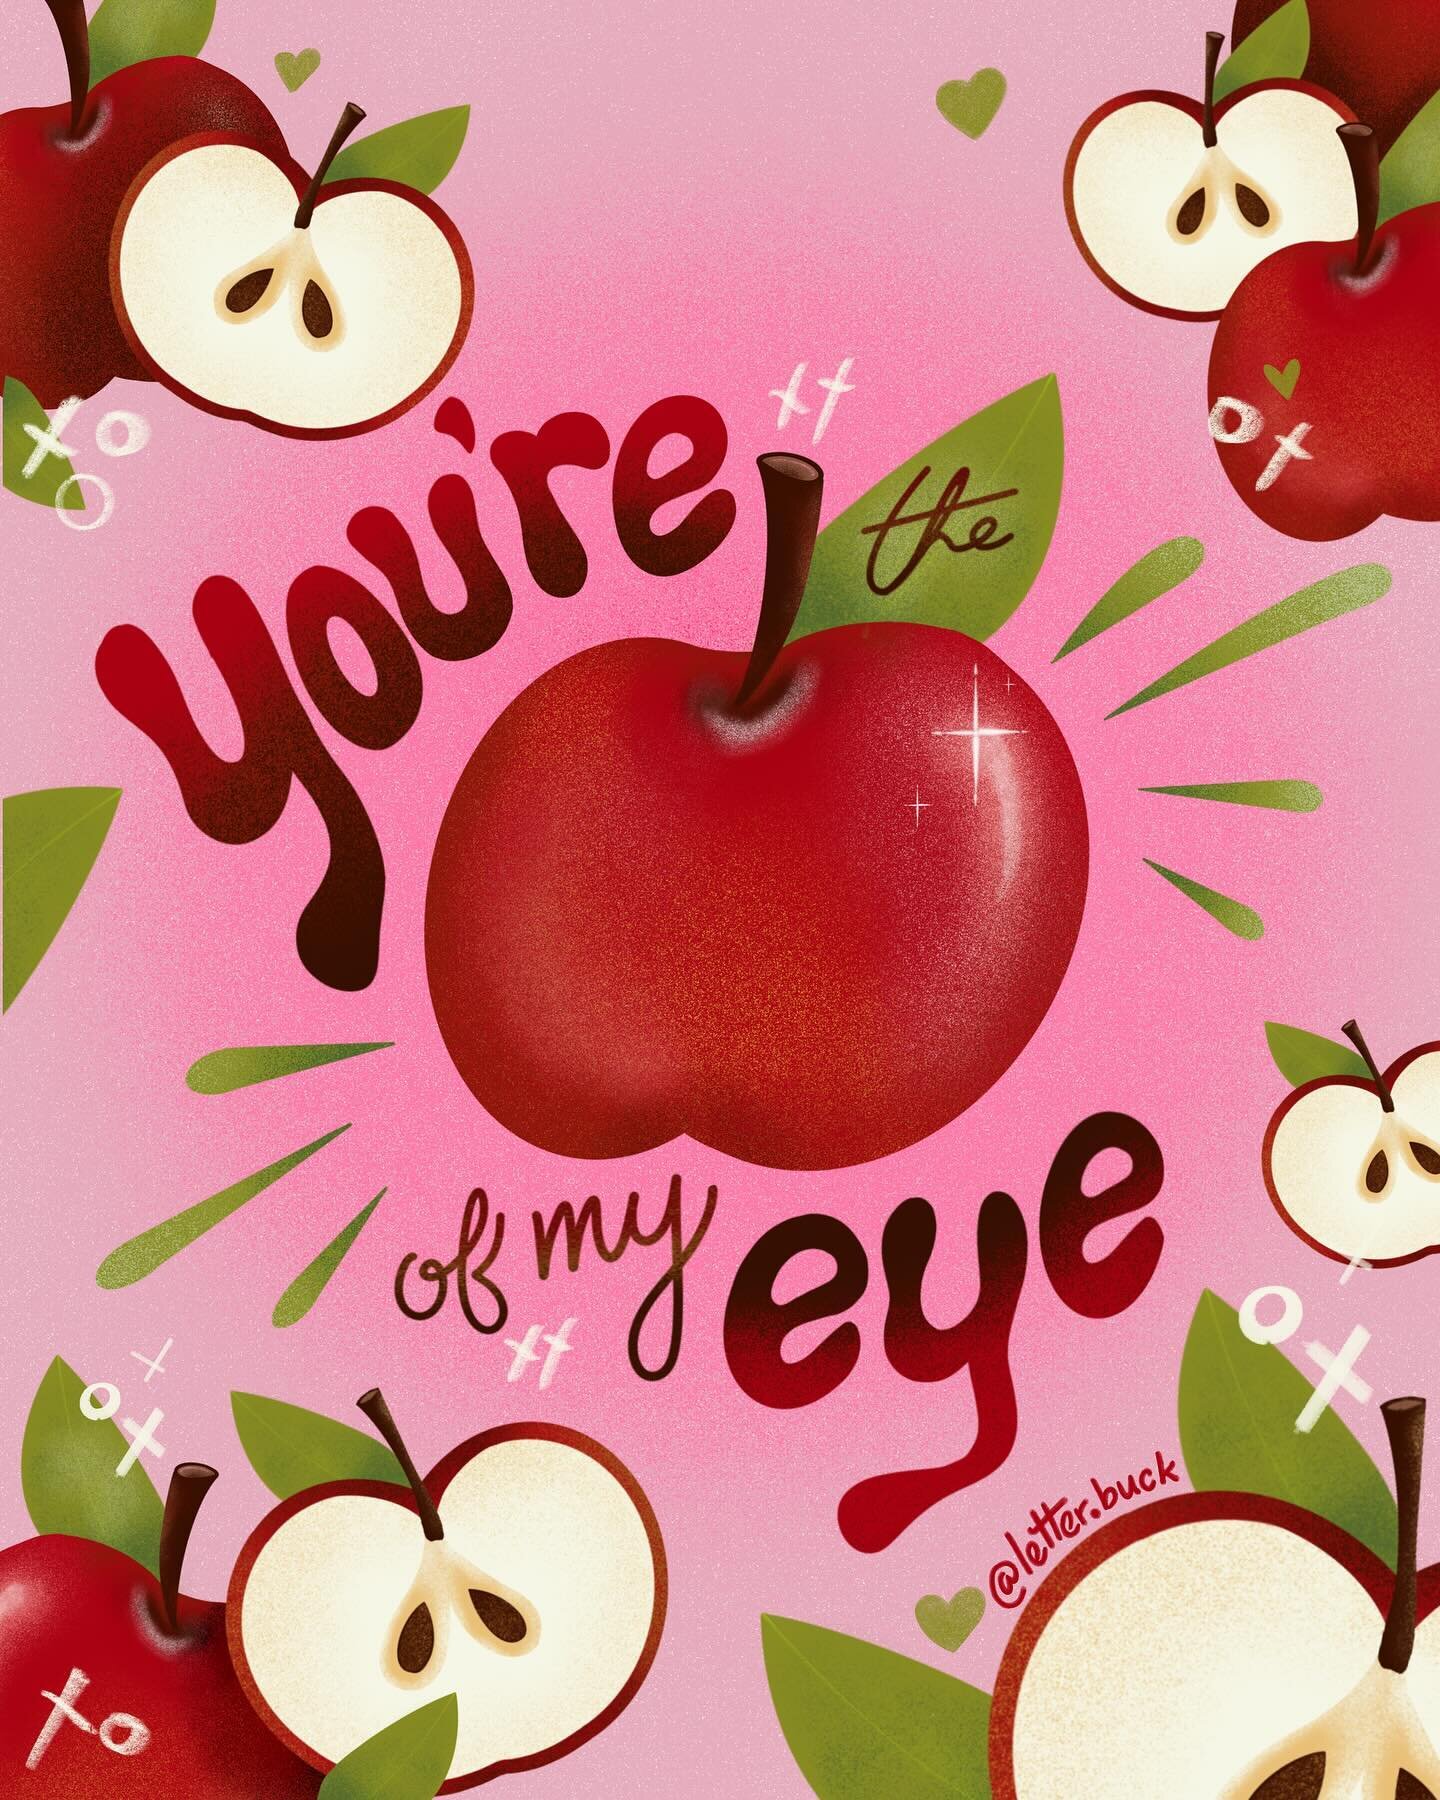 🍎 of my 👁️ 
- for prompt 1: Fruity and Flirty of the #CuteAndCupid Challenge hosted by:
@jag.ink 
@lizpoli
@alyssamariag
@seejessletter
@chickofalltrade
@artbybwsmith

#Procreatelettering #letteringdesign #Fruityandflirty #CuteAndCupid #February202